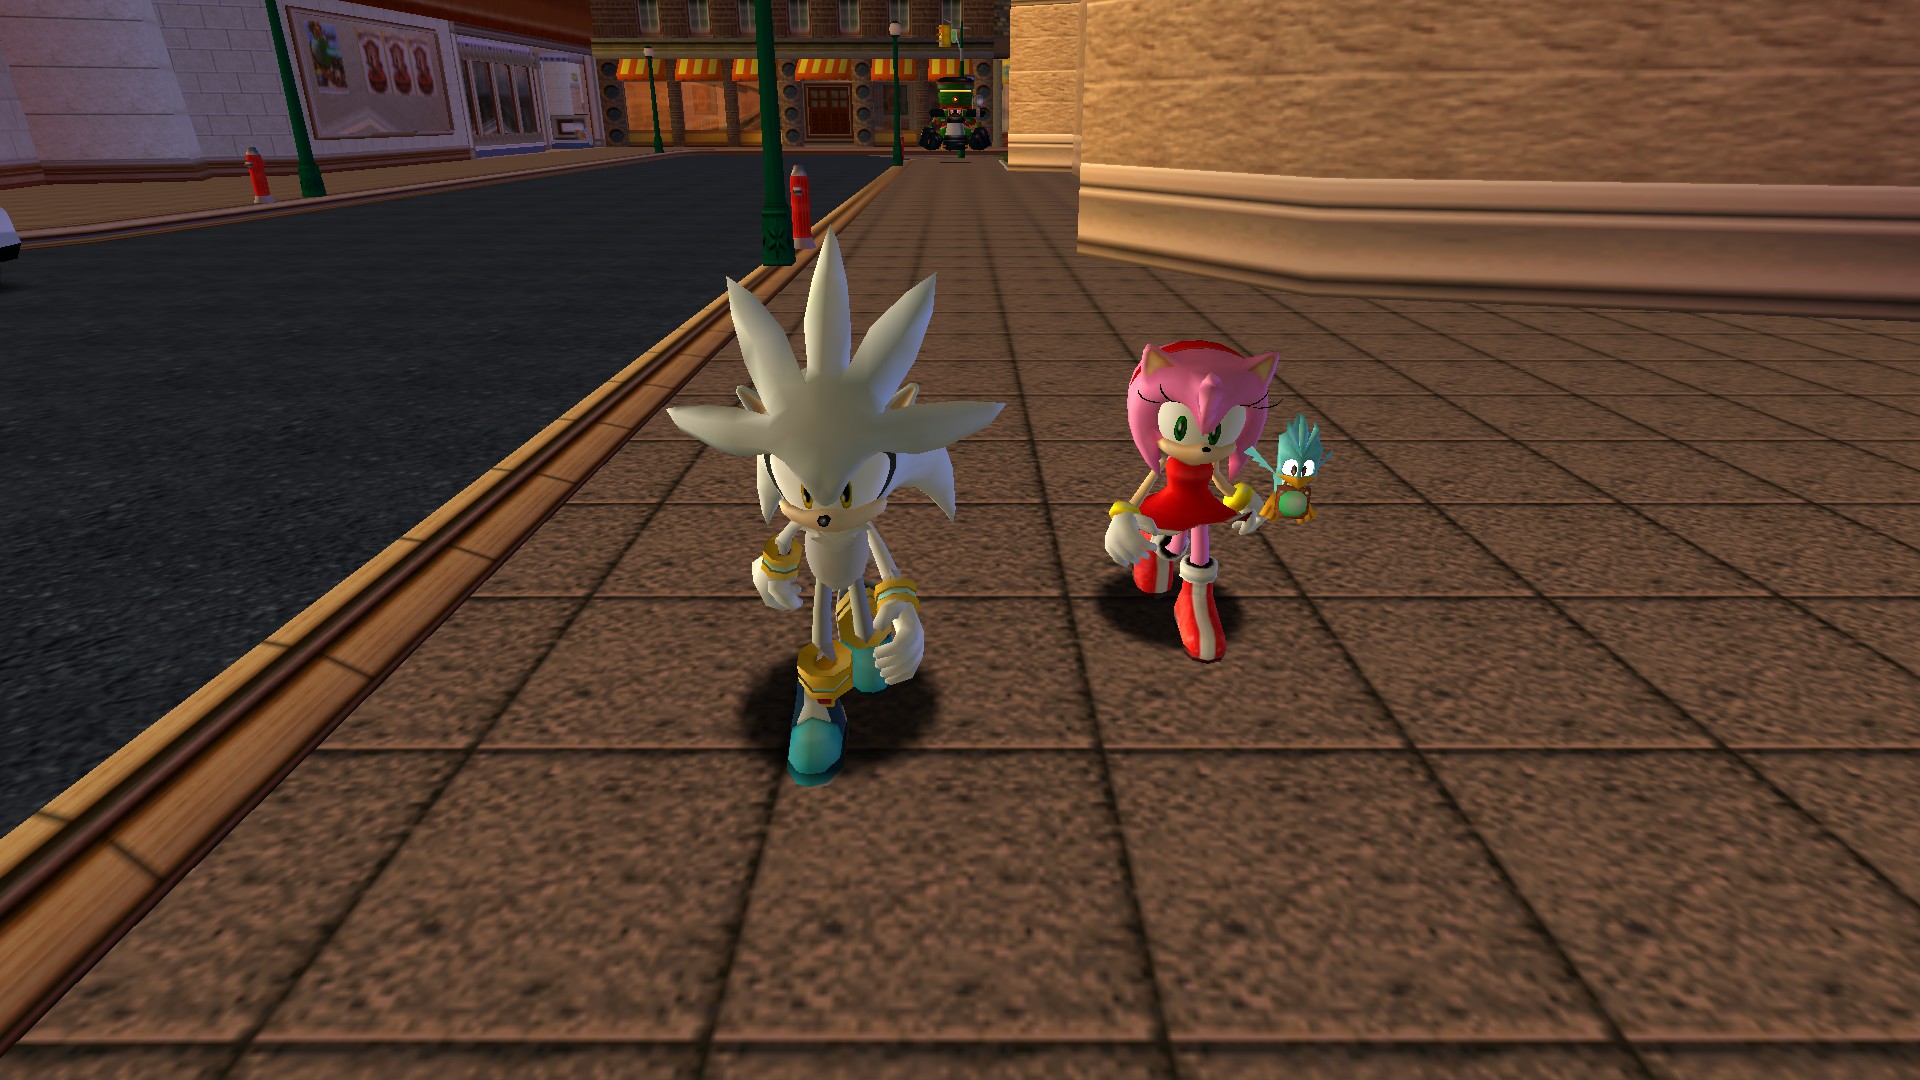 silver in sonic the hedgehog 1